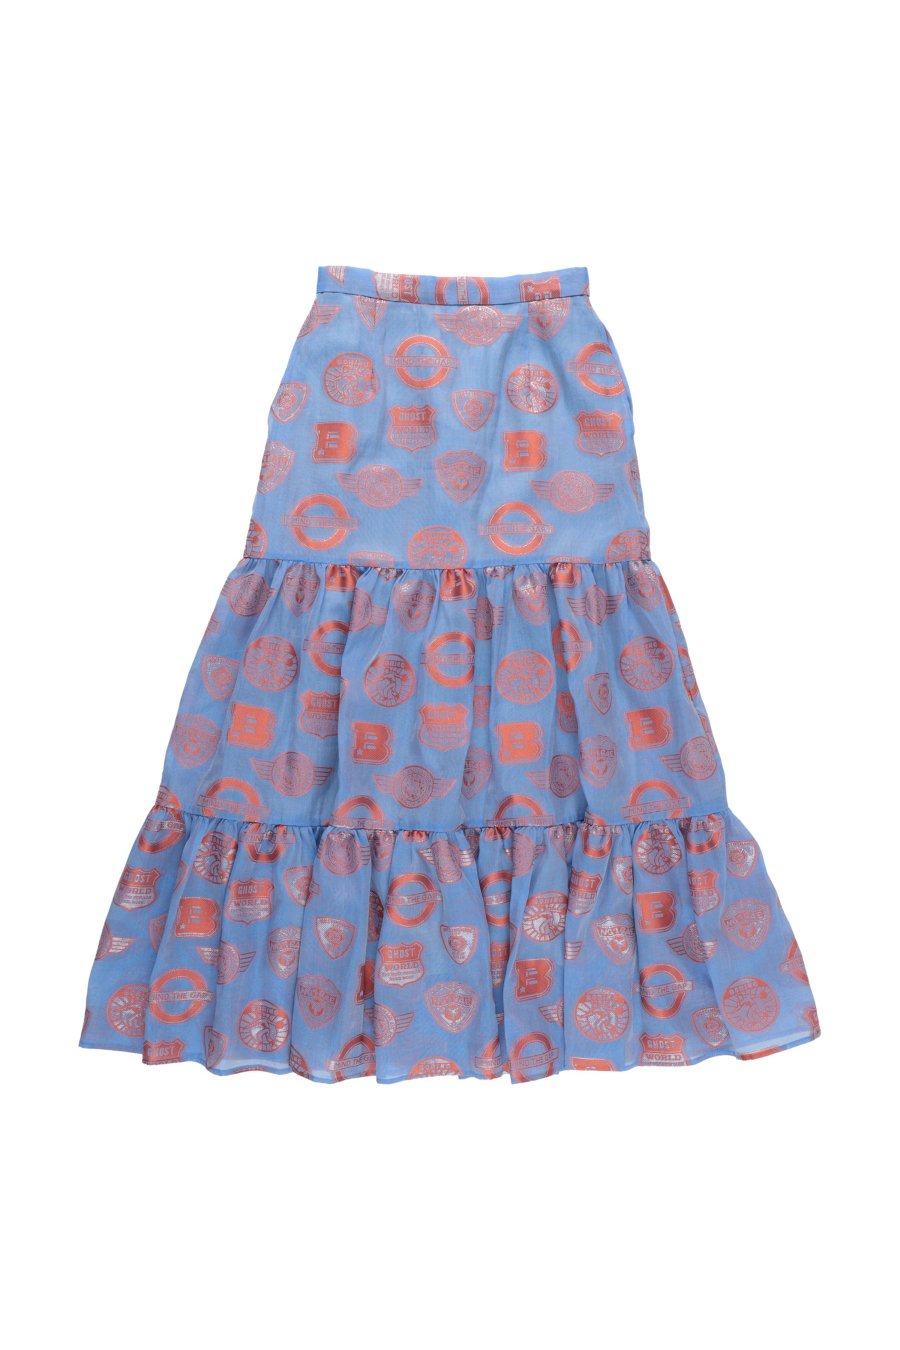 BELPER  MANY PATCH SKIRT BLUE/ORANGE<img class='new_mark_img2' src='https://img.shop-pro.jp/img/new/icons15.gif' style='border:none;display:inline;margin:0px;padding:0px;width:auto;' />